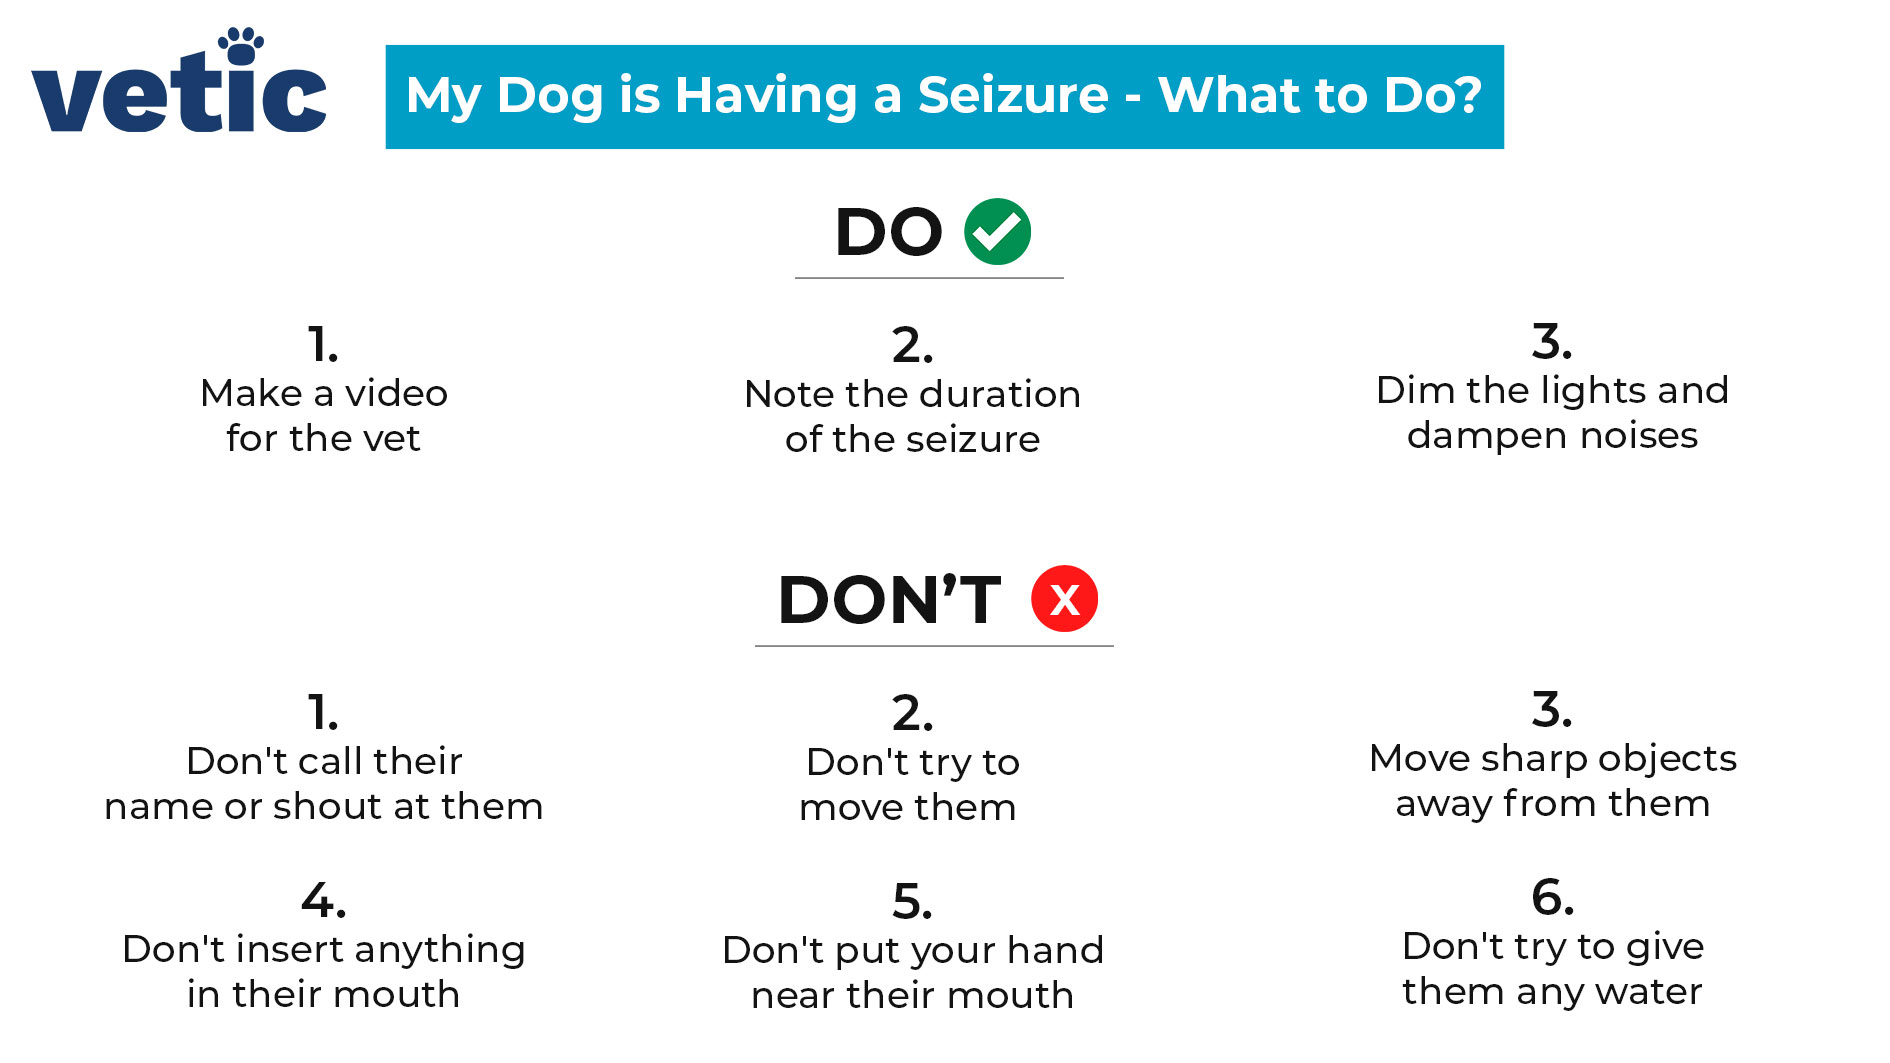 Dog is having a seizure - here's what you should do - 1. Make a video for the vet 2. Note the duration of the seizure 3. Dim the lights and dampen noises What you shouldn't do - 1. Don't call their name or shout at them 2. Don't try to move them 3. Move sharp objects away from them 4. Don't insert anything in their mouth 5. Don't put your hand near their mouth 6. Don't try to give them any water